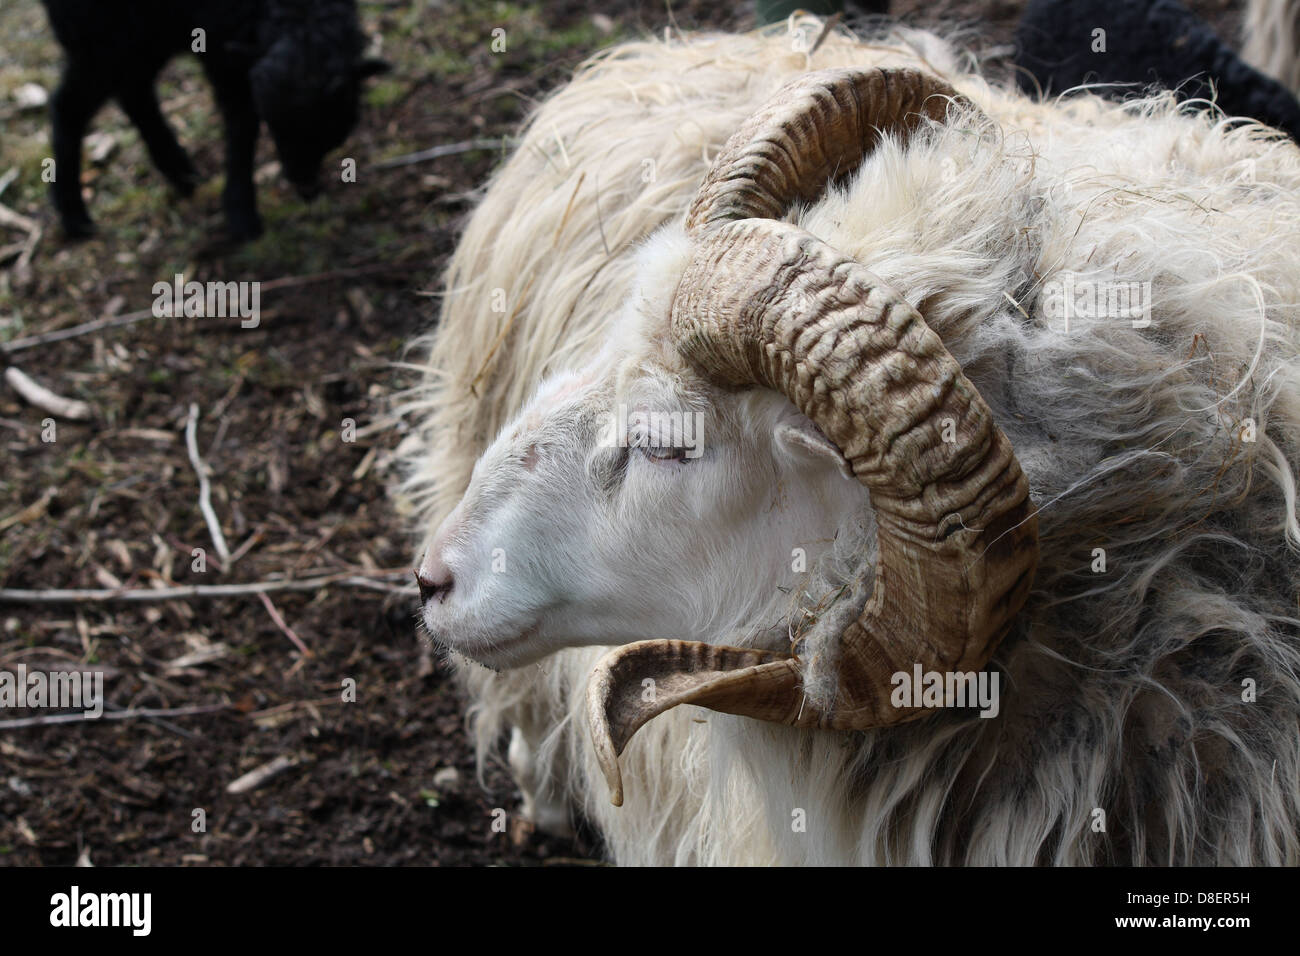 A sheep with horns. Stock Photo